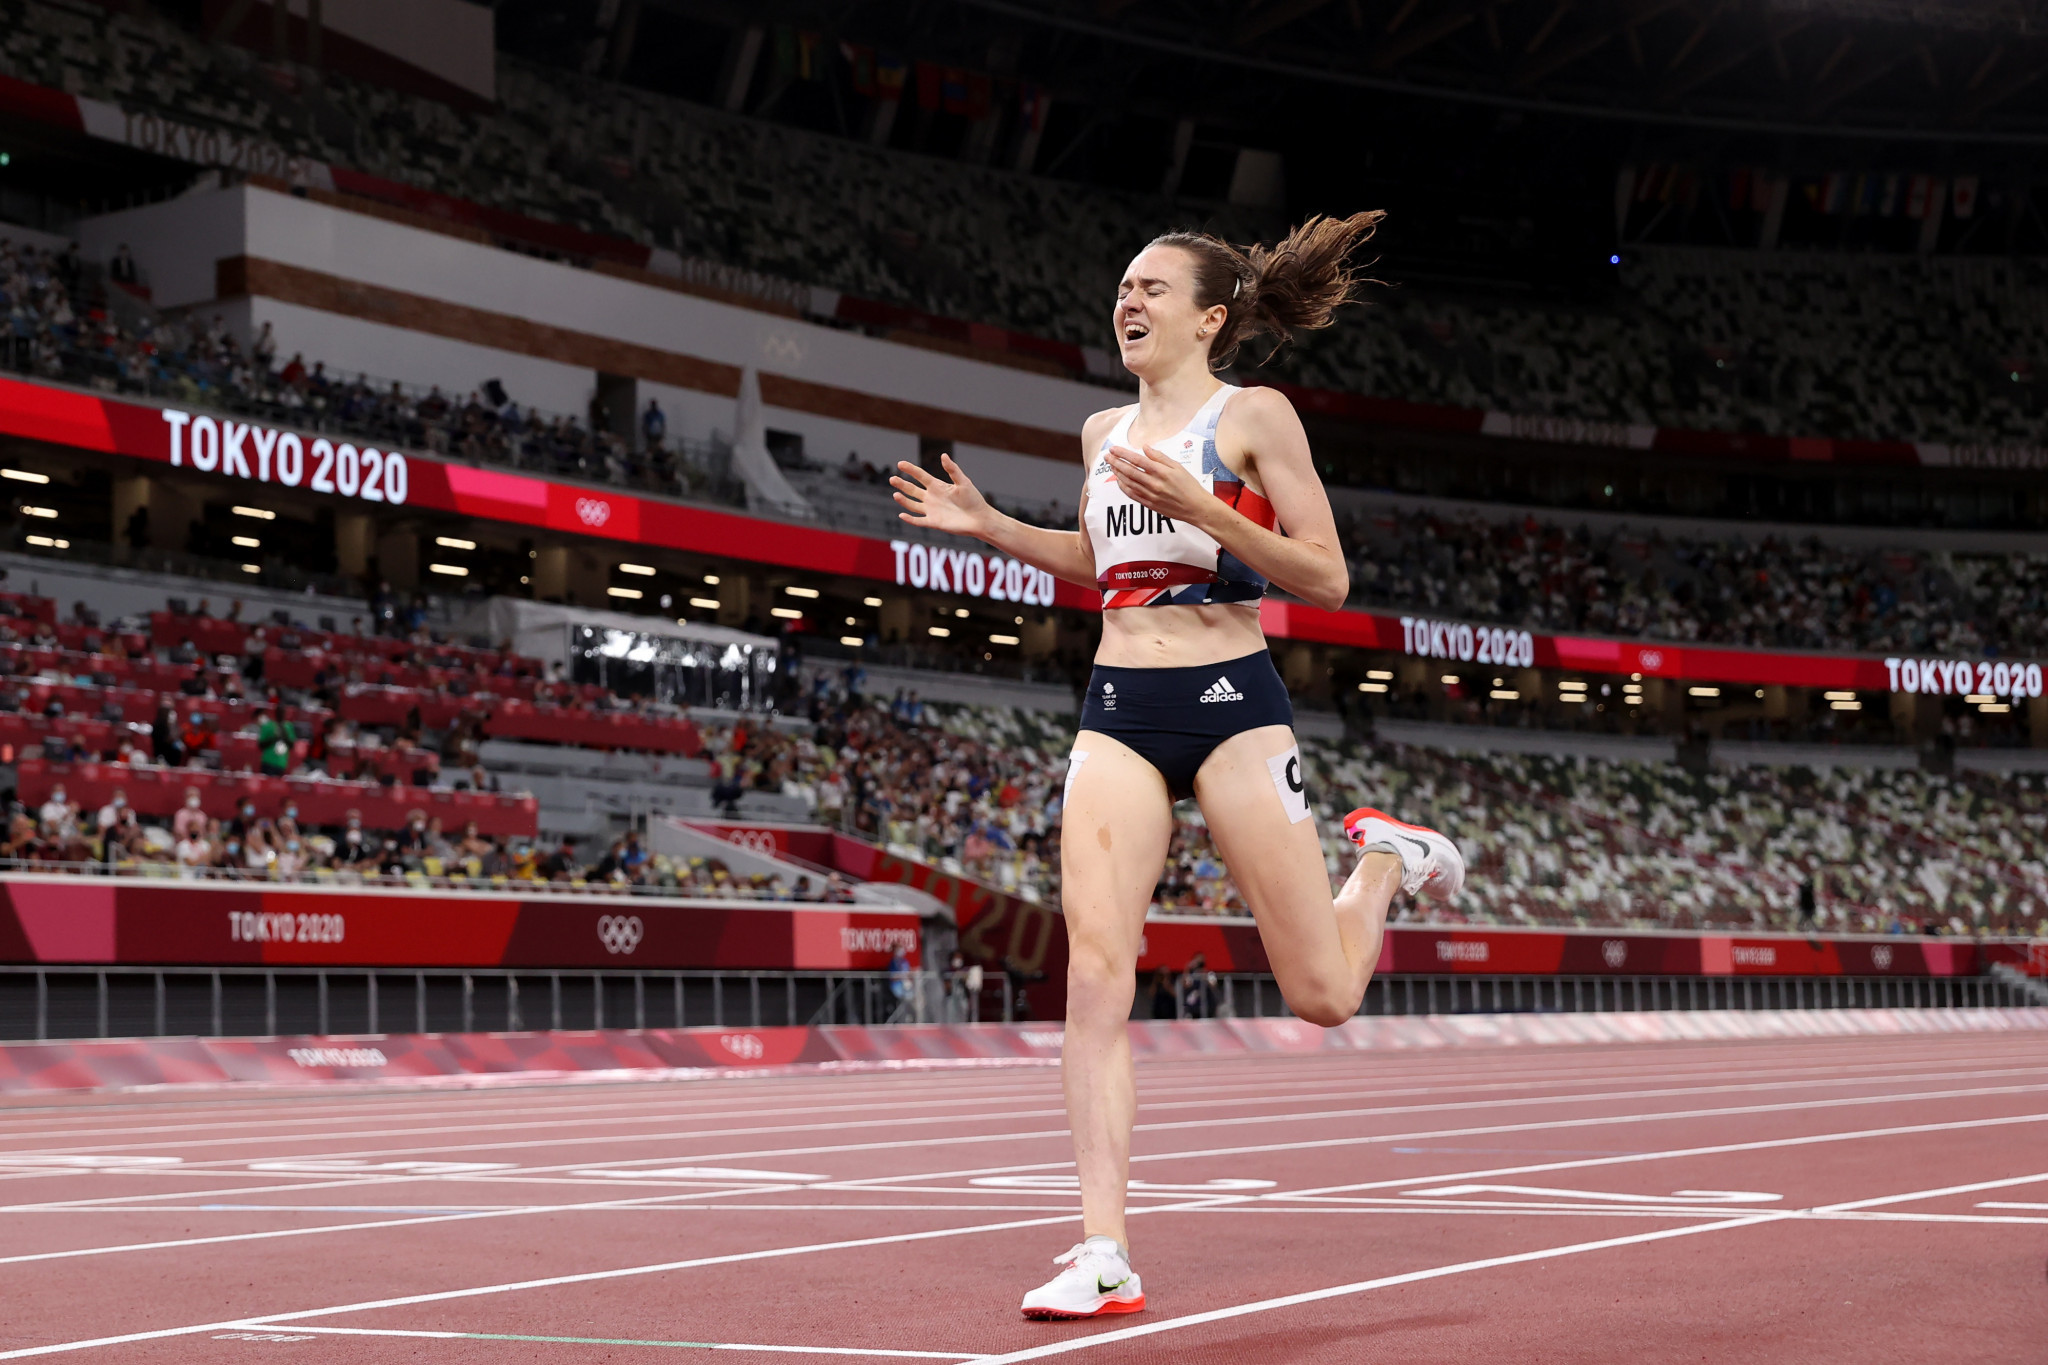 Laura Muir won silver at the Tokyo 2020 Olympic Games ©Getty Images